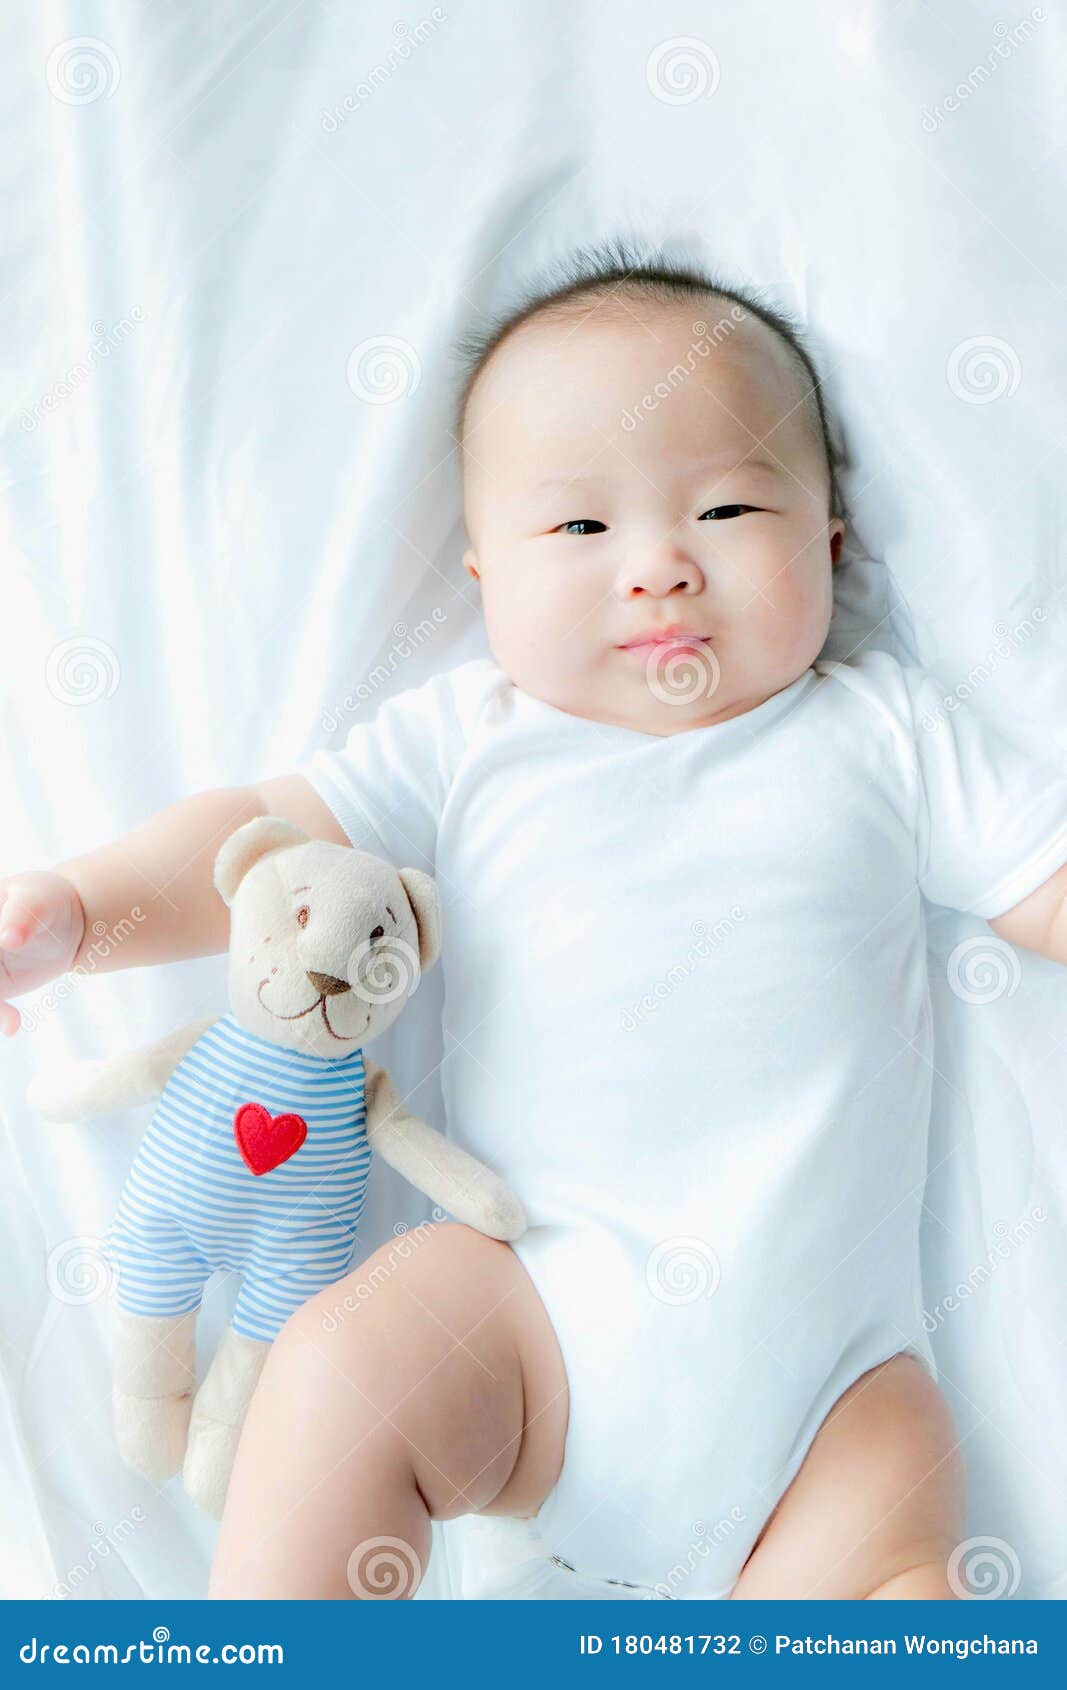 Top View Portrait of a Newborn Asian Cute Baby Boy Wore White ...